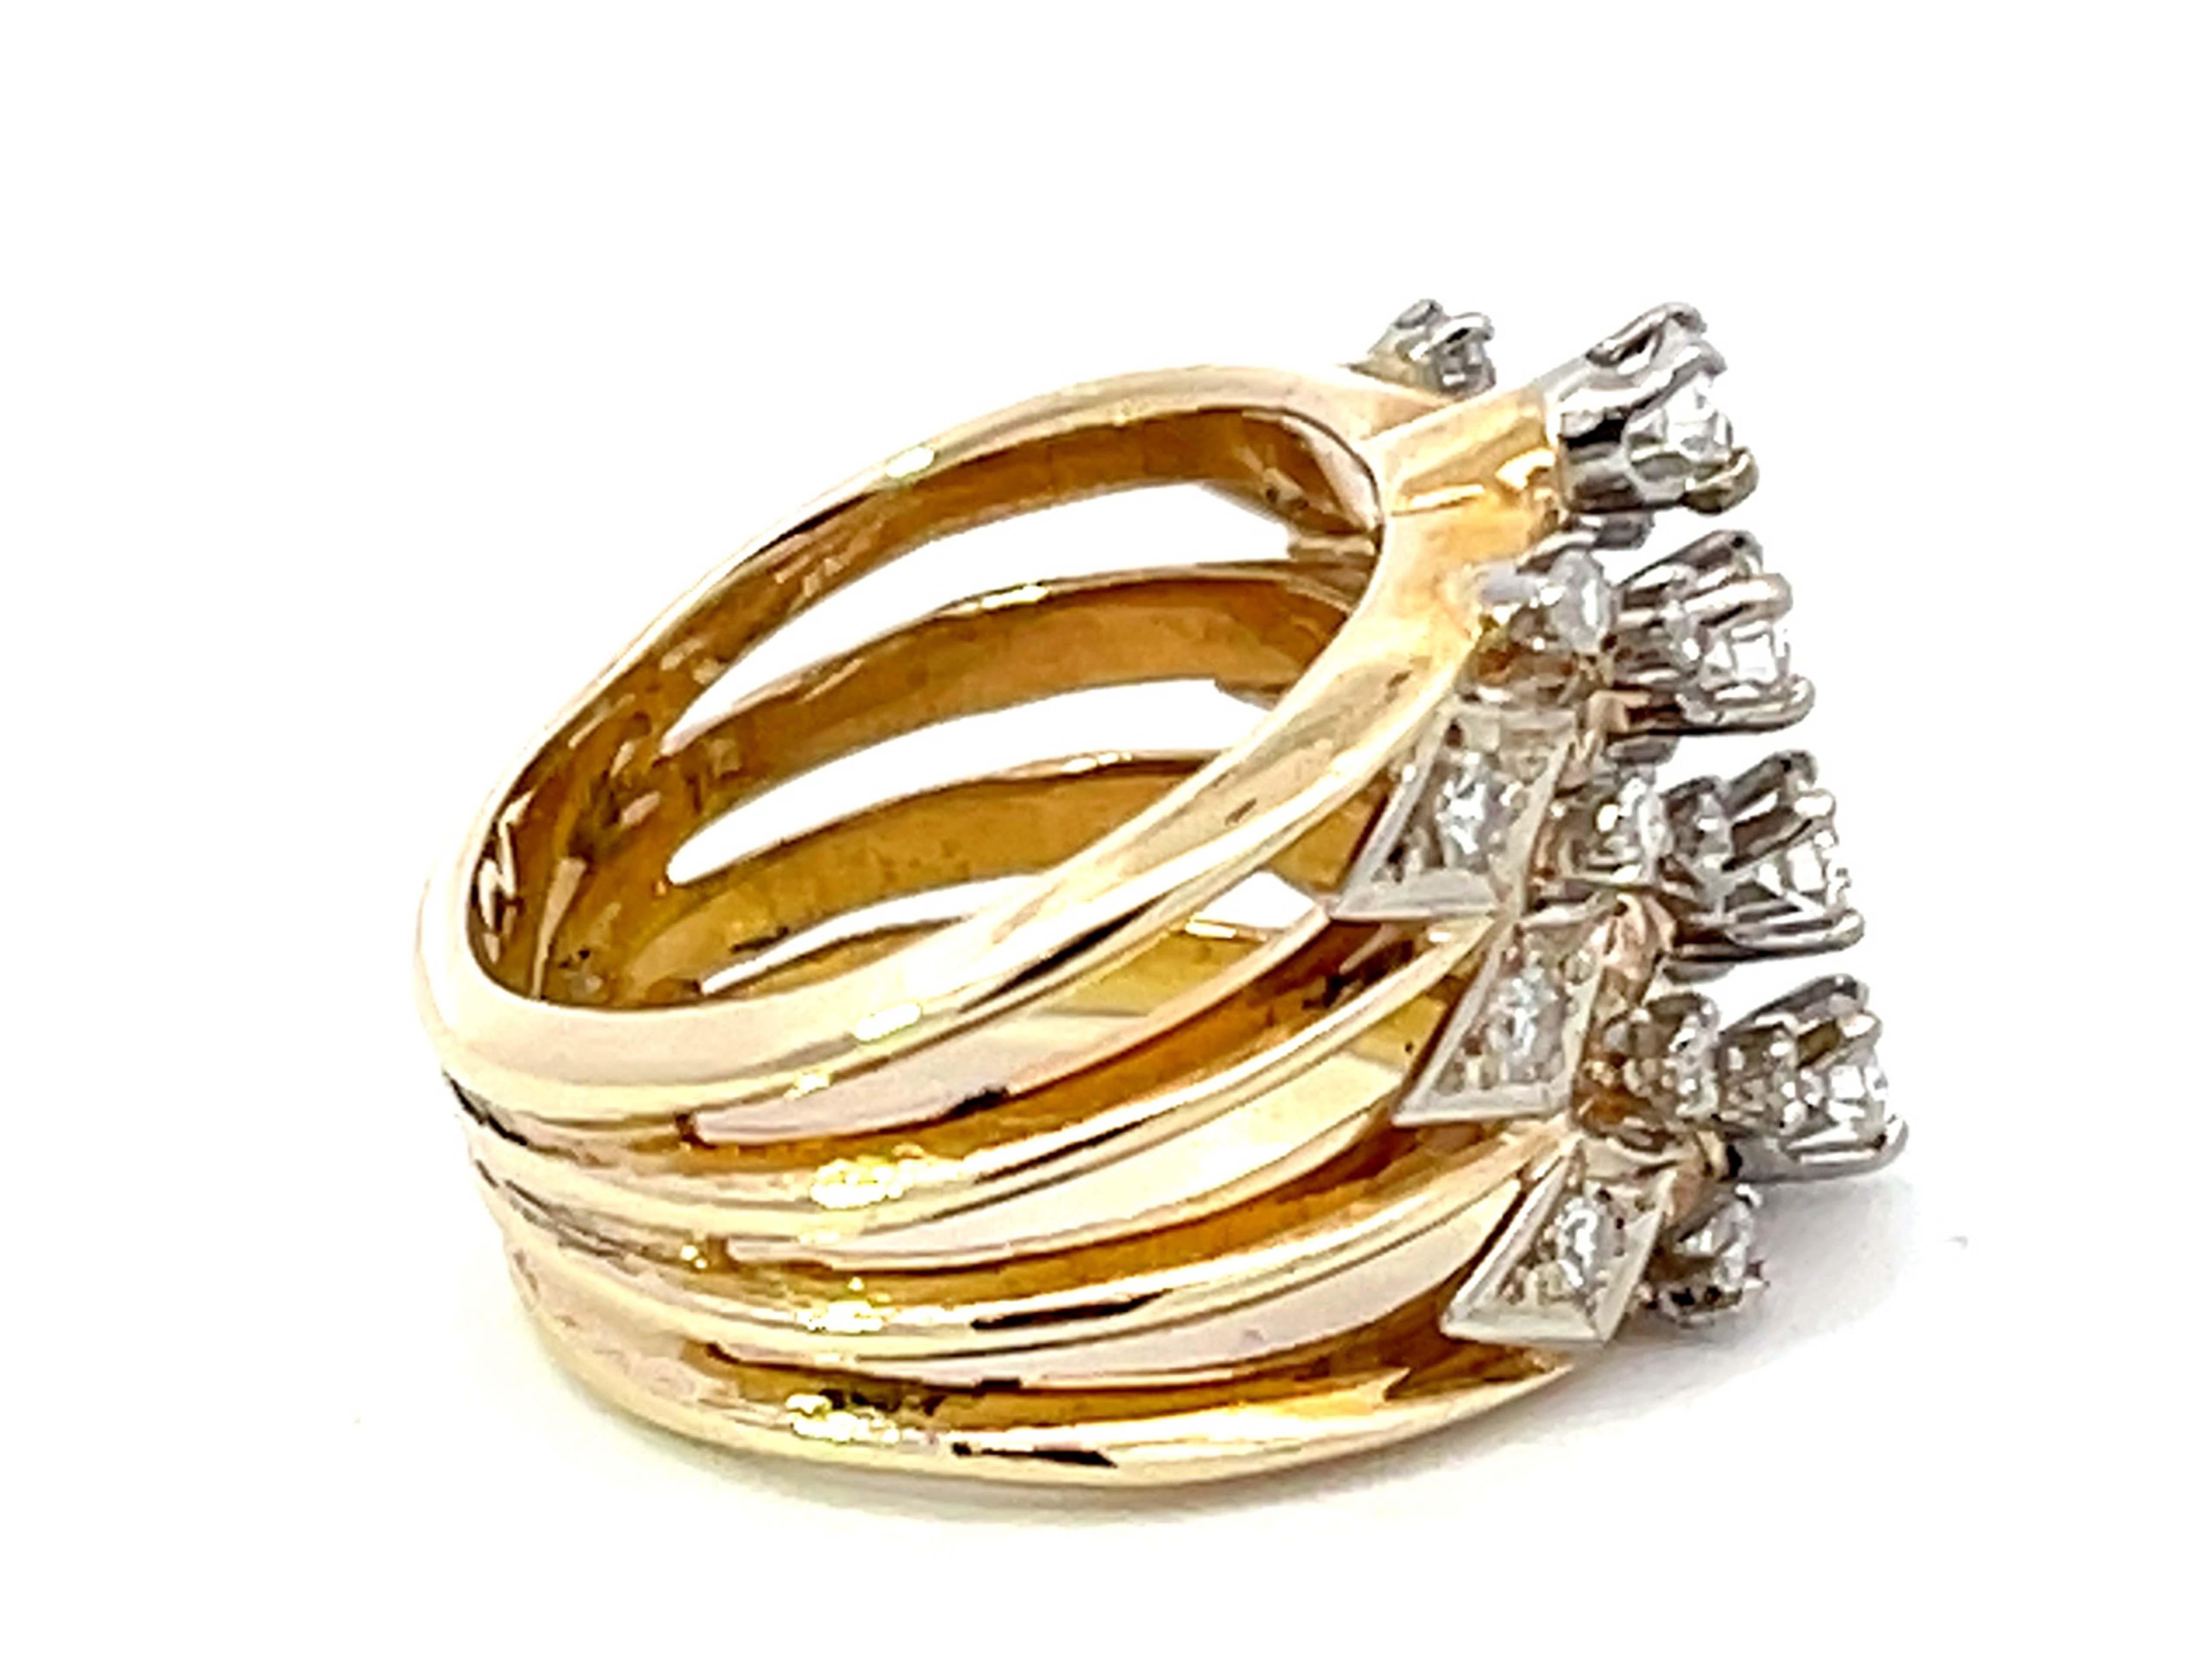 Wide Diamond Band Cutout Design Ring in 14K Yellow Gold In Excellent Condition For Sale In Honolulu, HI